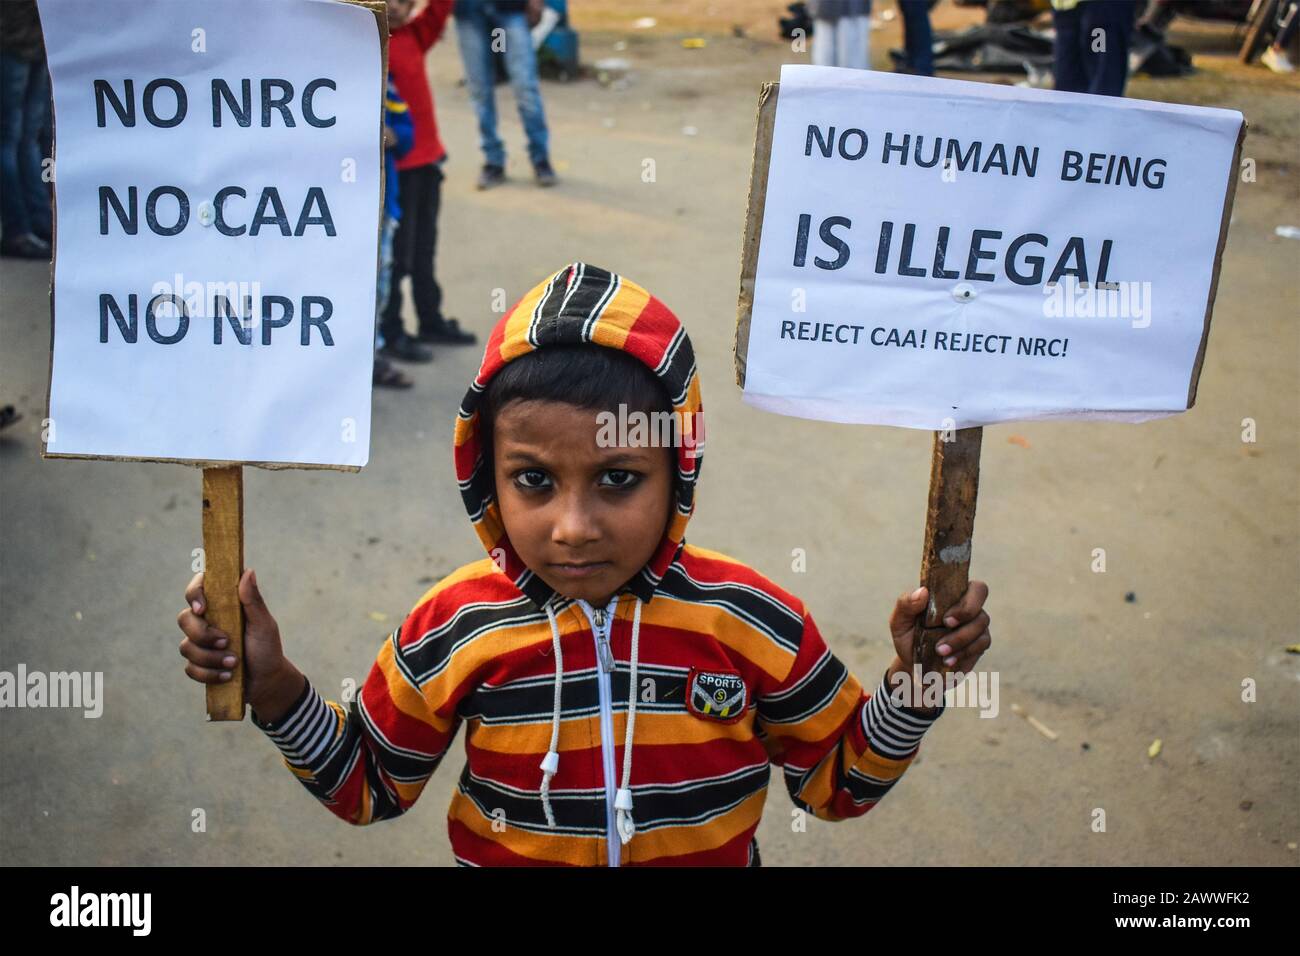 A little boy is showing the No NRC placard on a protest Program for NRC and CAA in Kolkata, India. Stock Photo